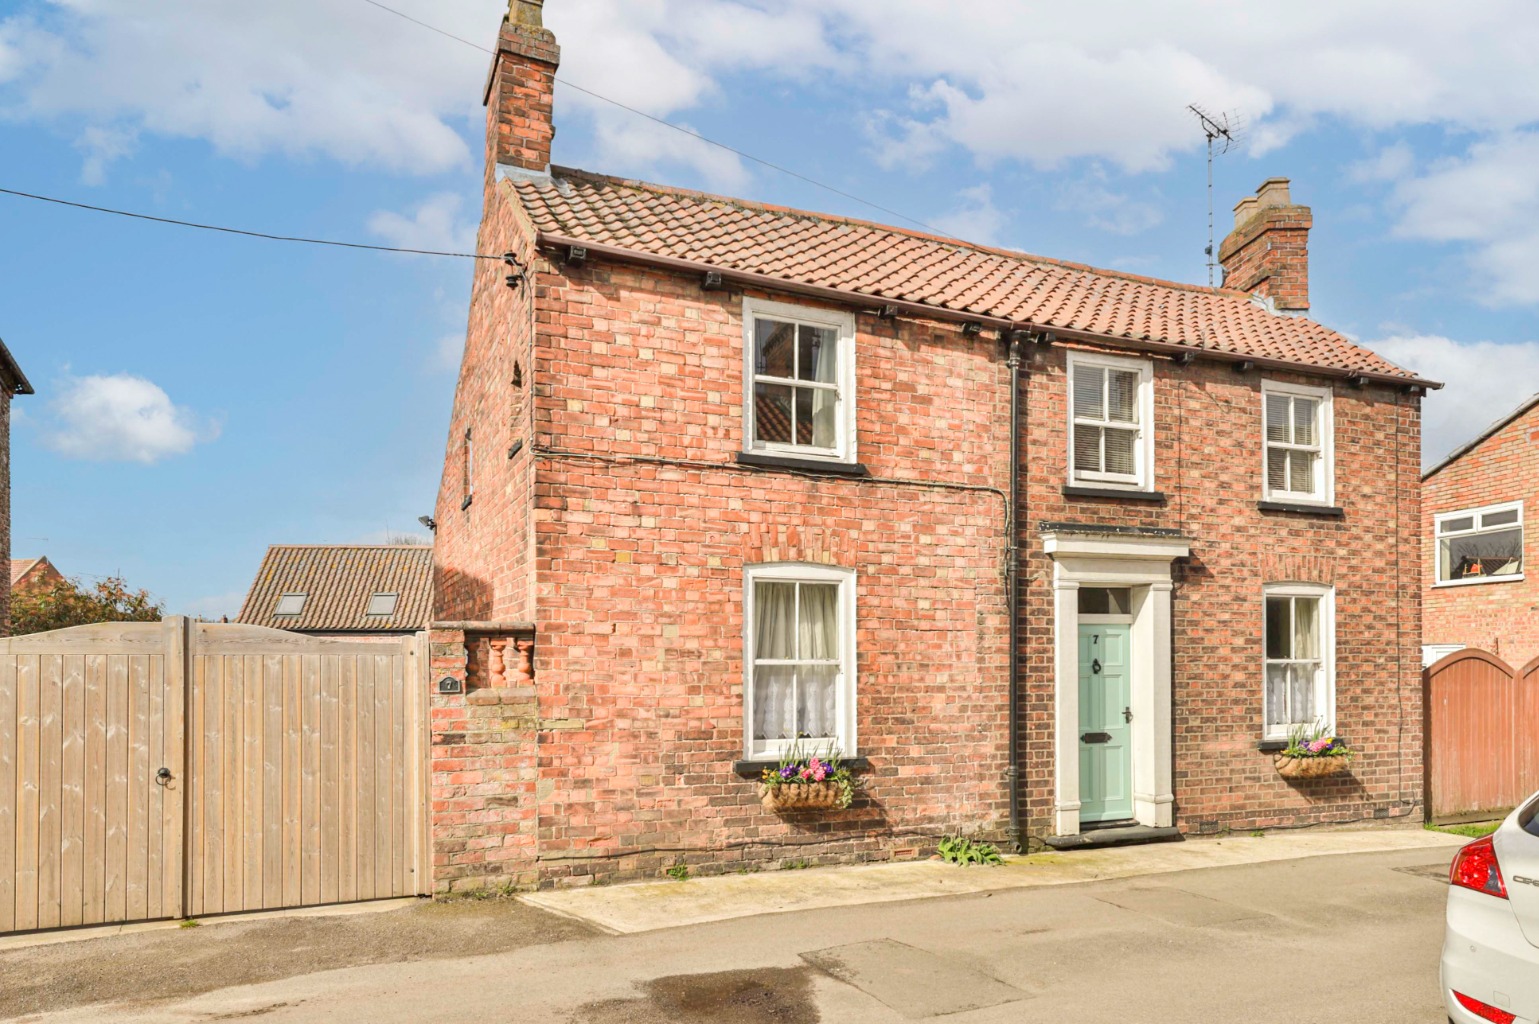 Detached house in Lords Lane, Barrow-Upon-Humber, DN19 7BX